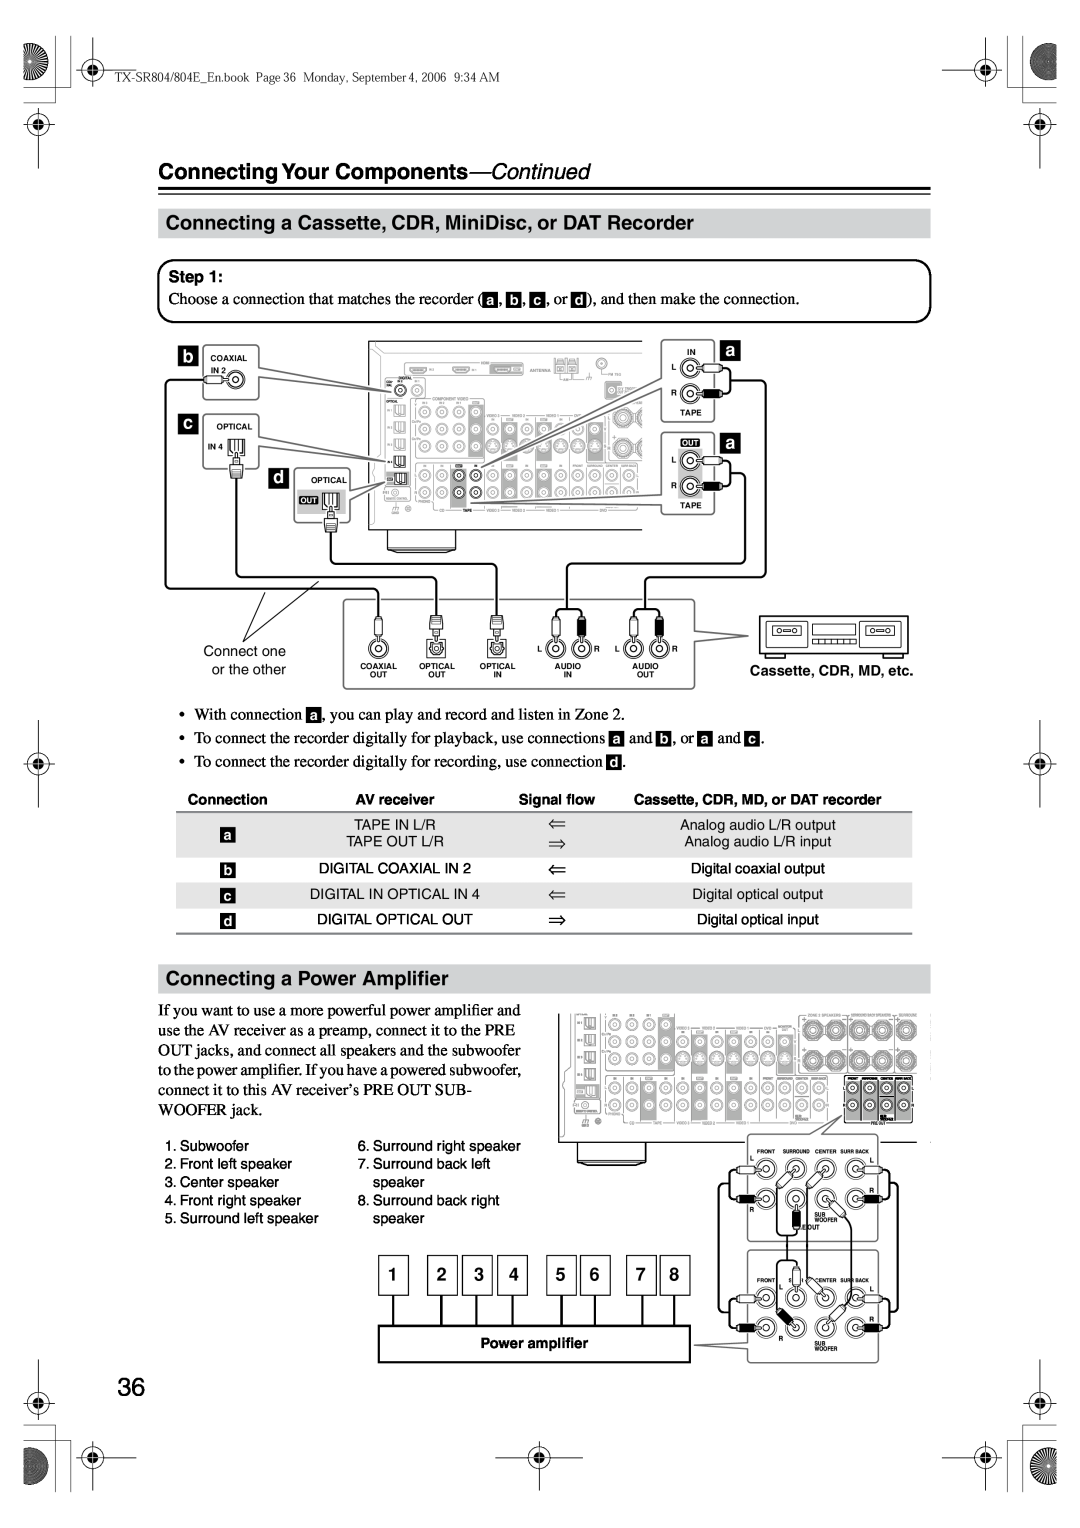 Onkyo TX-SR804E instruction manual Connecting a Power Ampliﬁer, Connecting Your Components—Continued 